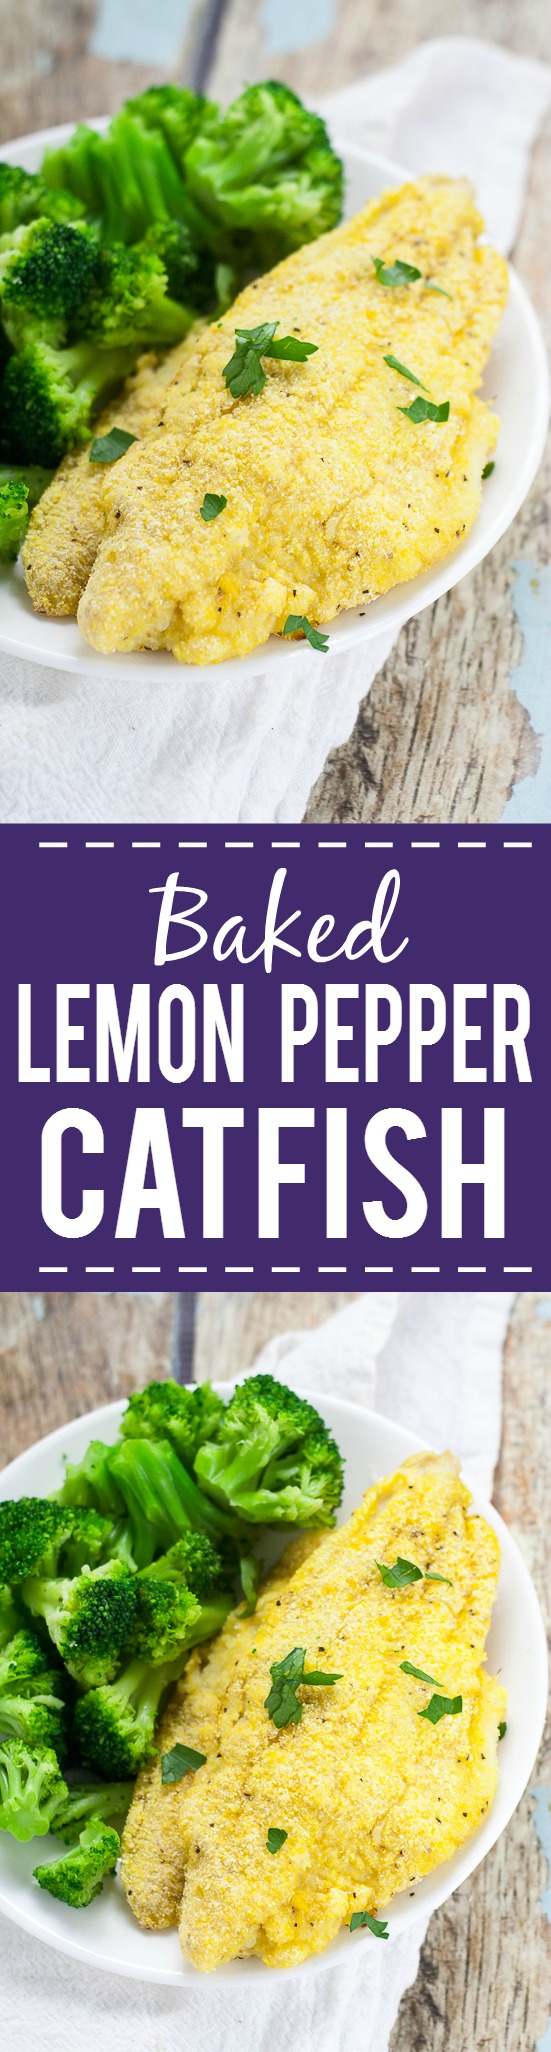 Lemon Pepper Baked Catfish Recipe - Crisp, zesty and baked right in the oven, this Lemon Pepper Baked Catfish recipe can be made in just 30 minutes with 5 ingredients! Quick and easy dinner recipe. Healthy too!